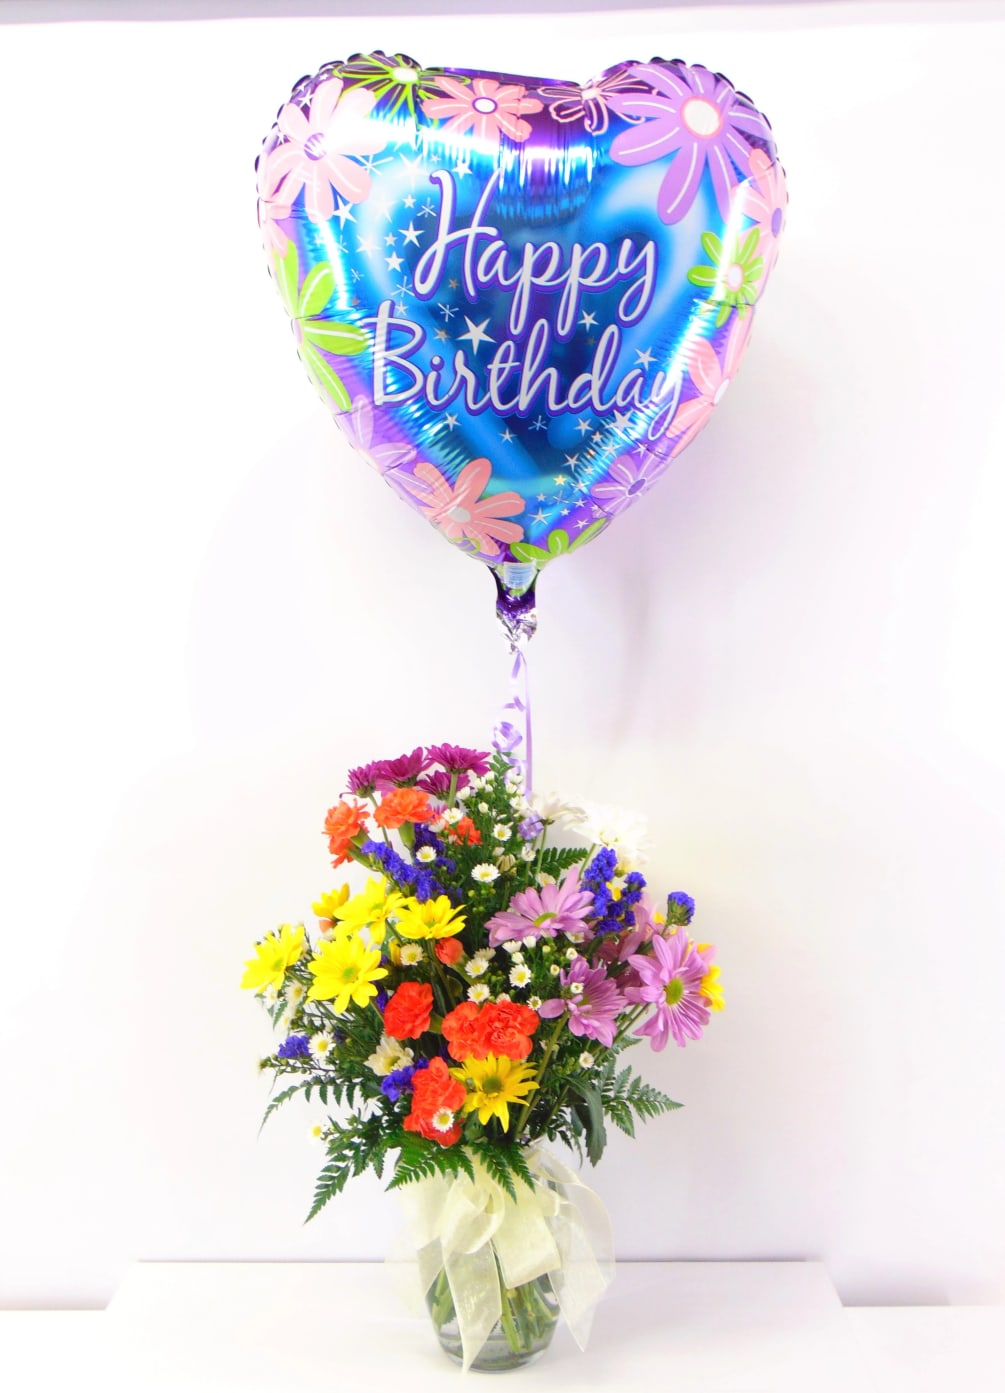 Colorful mixed blooms arranged in a clear glass vase topped off with